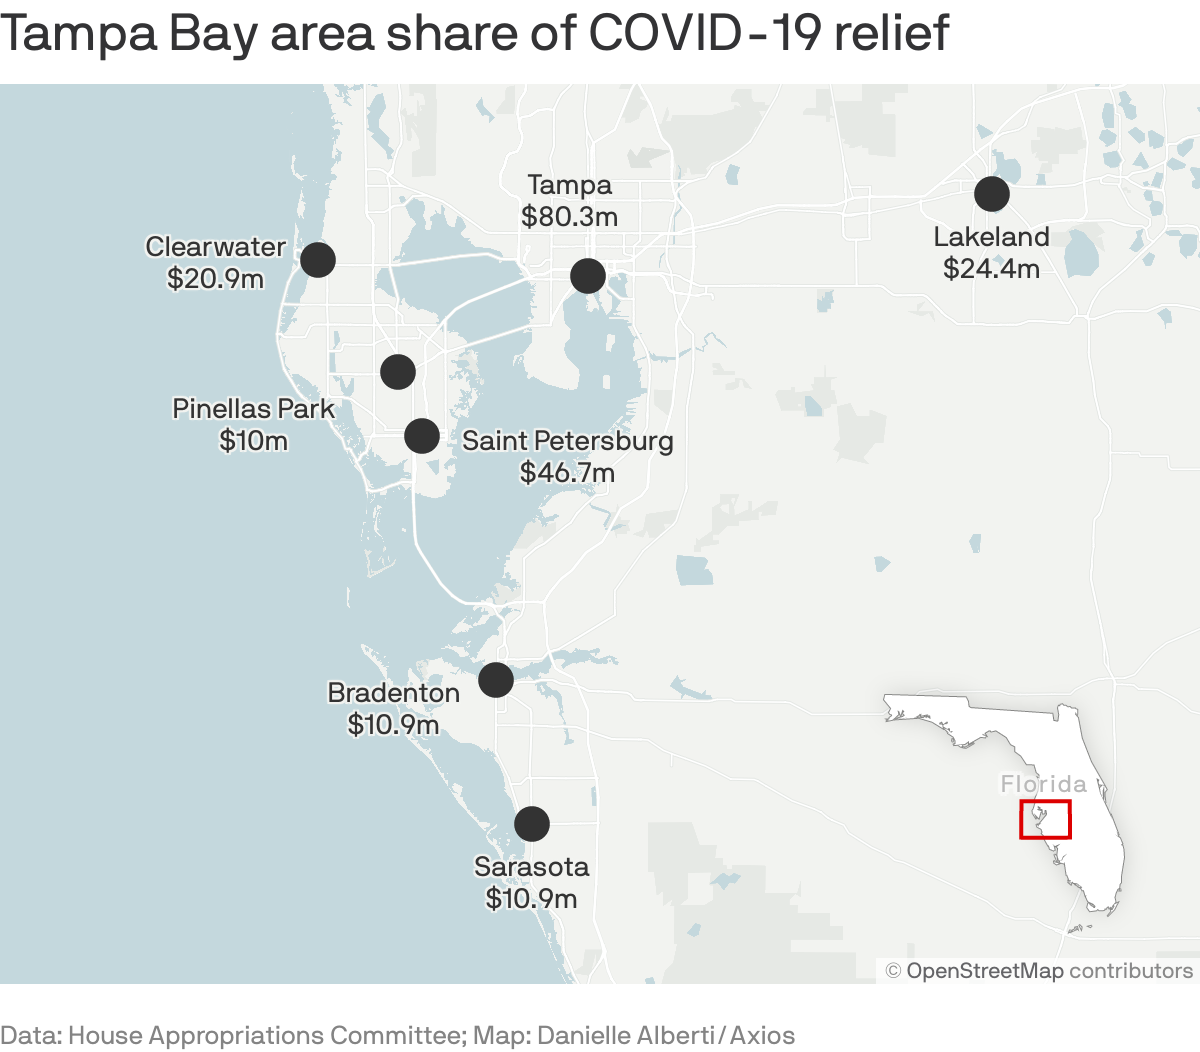 Tampa Bay area share of COVID-19 relief